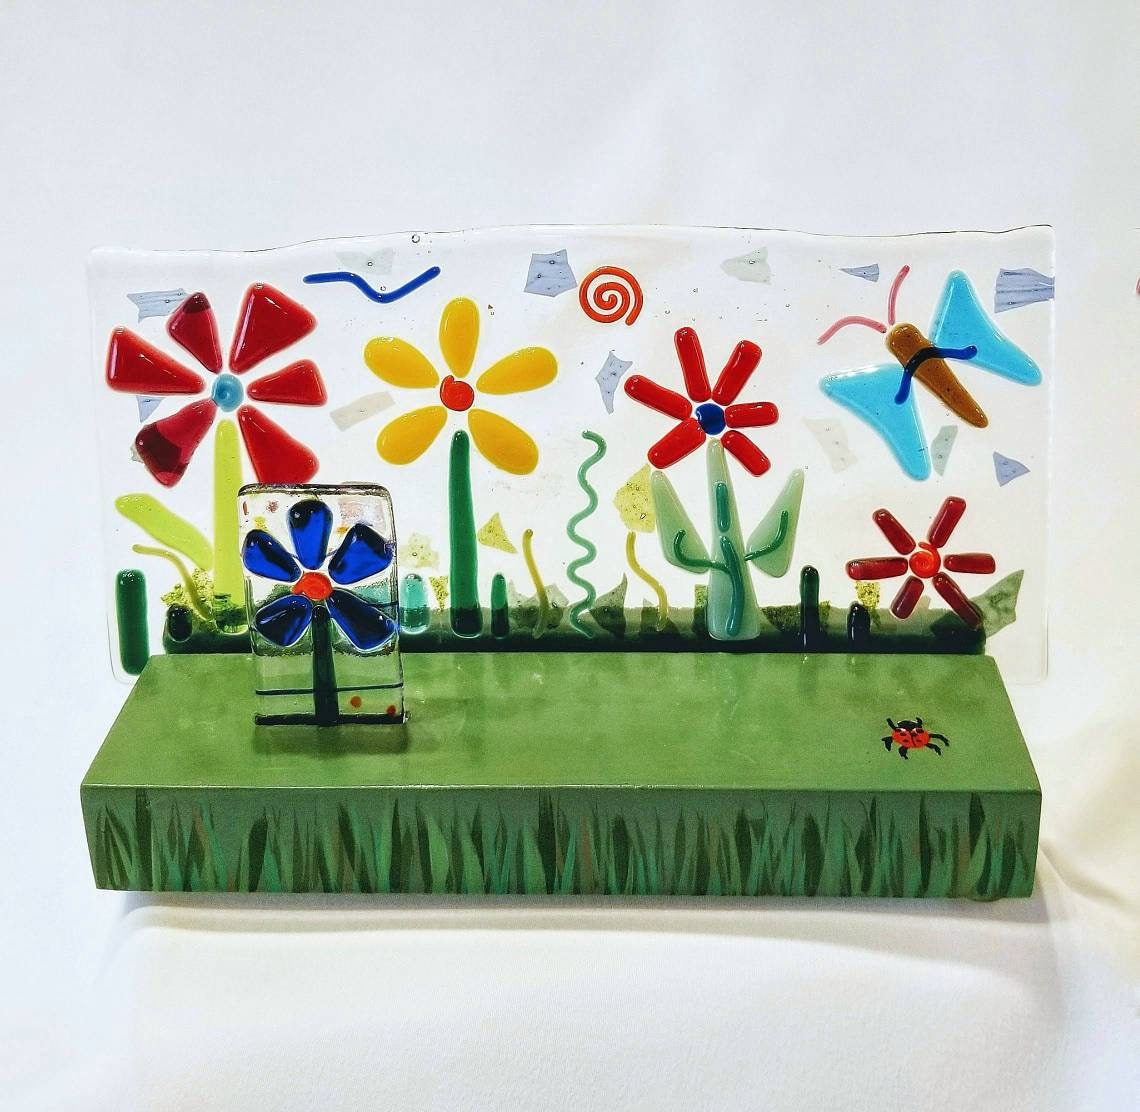 Fused Glass Flowers, 3 dimensional, Hand painted Base with Lady Bug & Green Grass. Table Top or Shelf Display. Free shipping, gift wrapped.